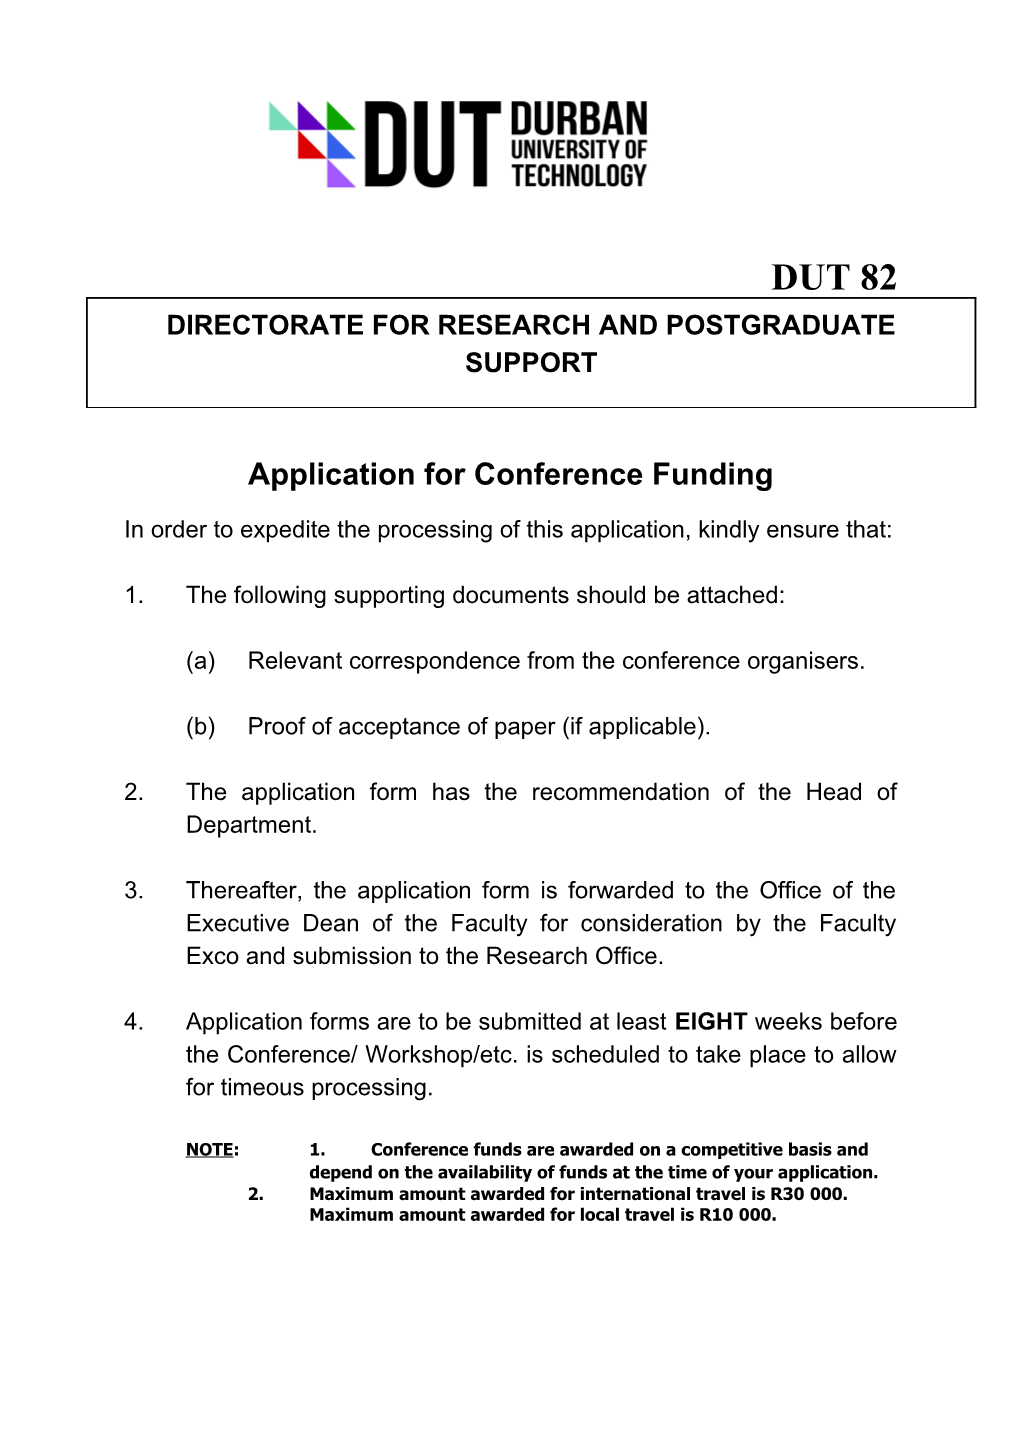 Application for Conference Funding